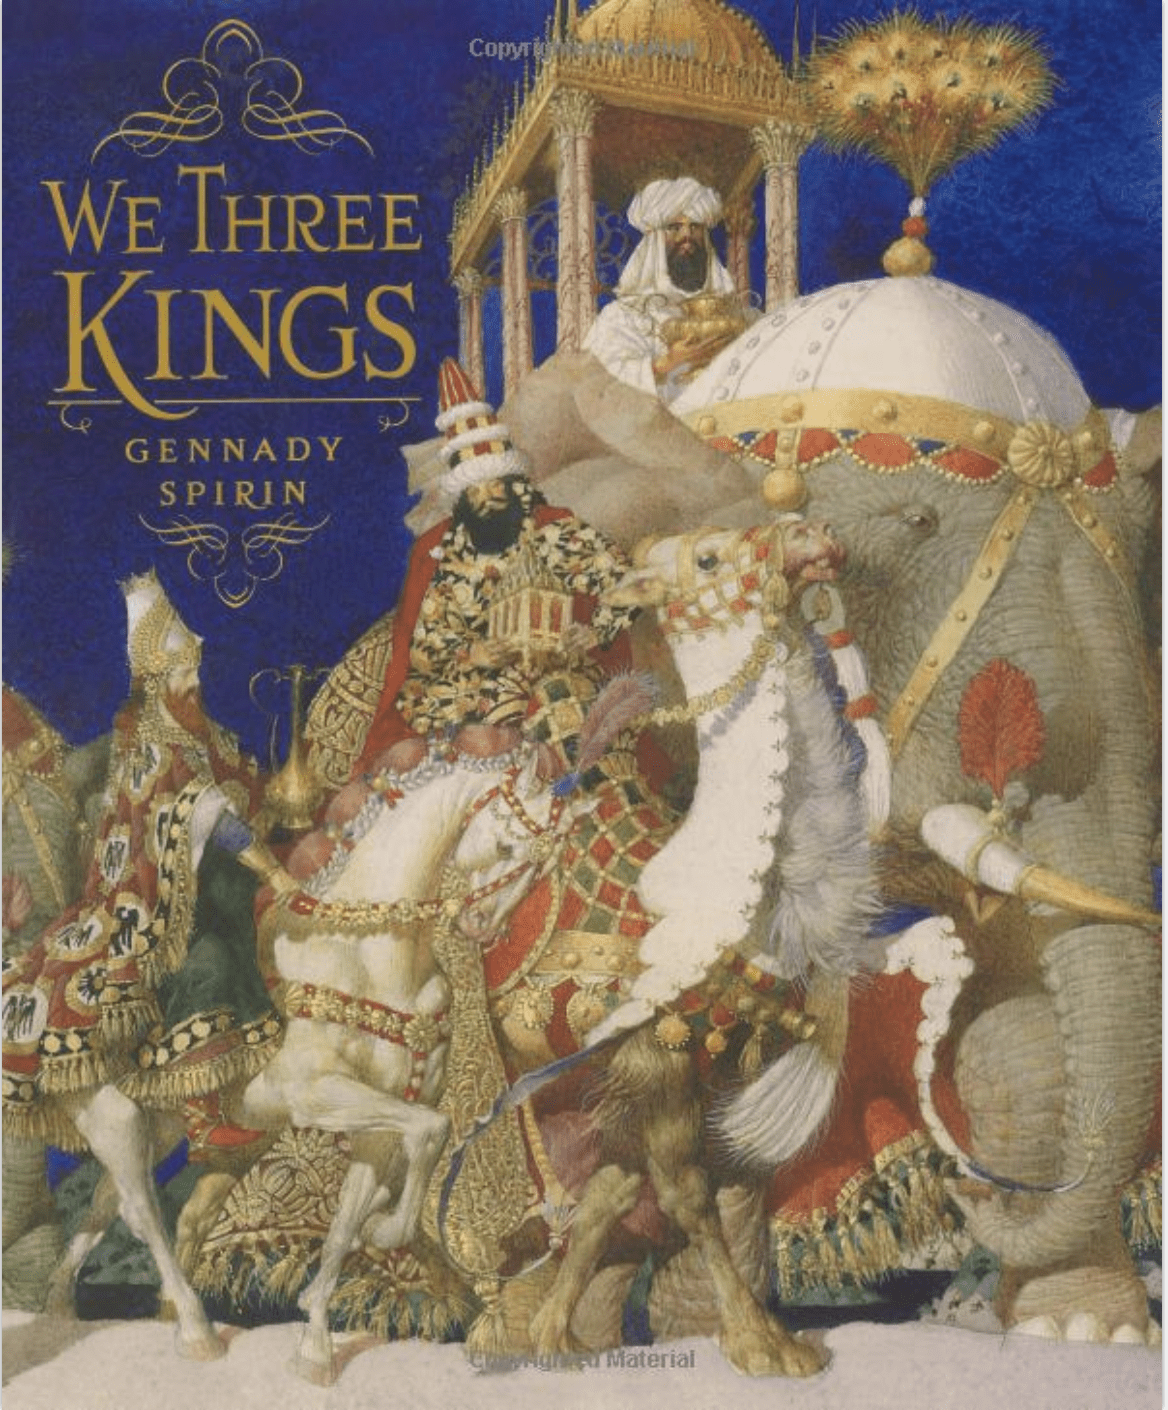 We Three Kings book for children